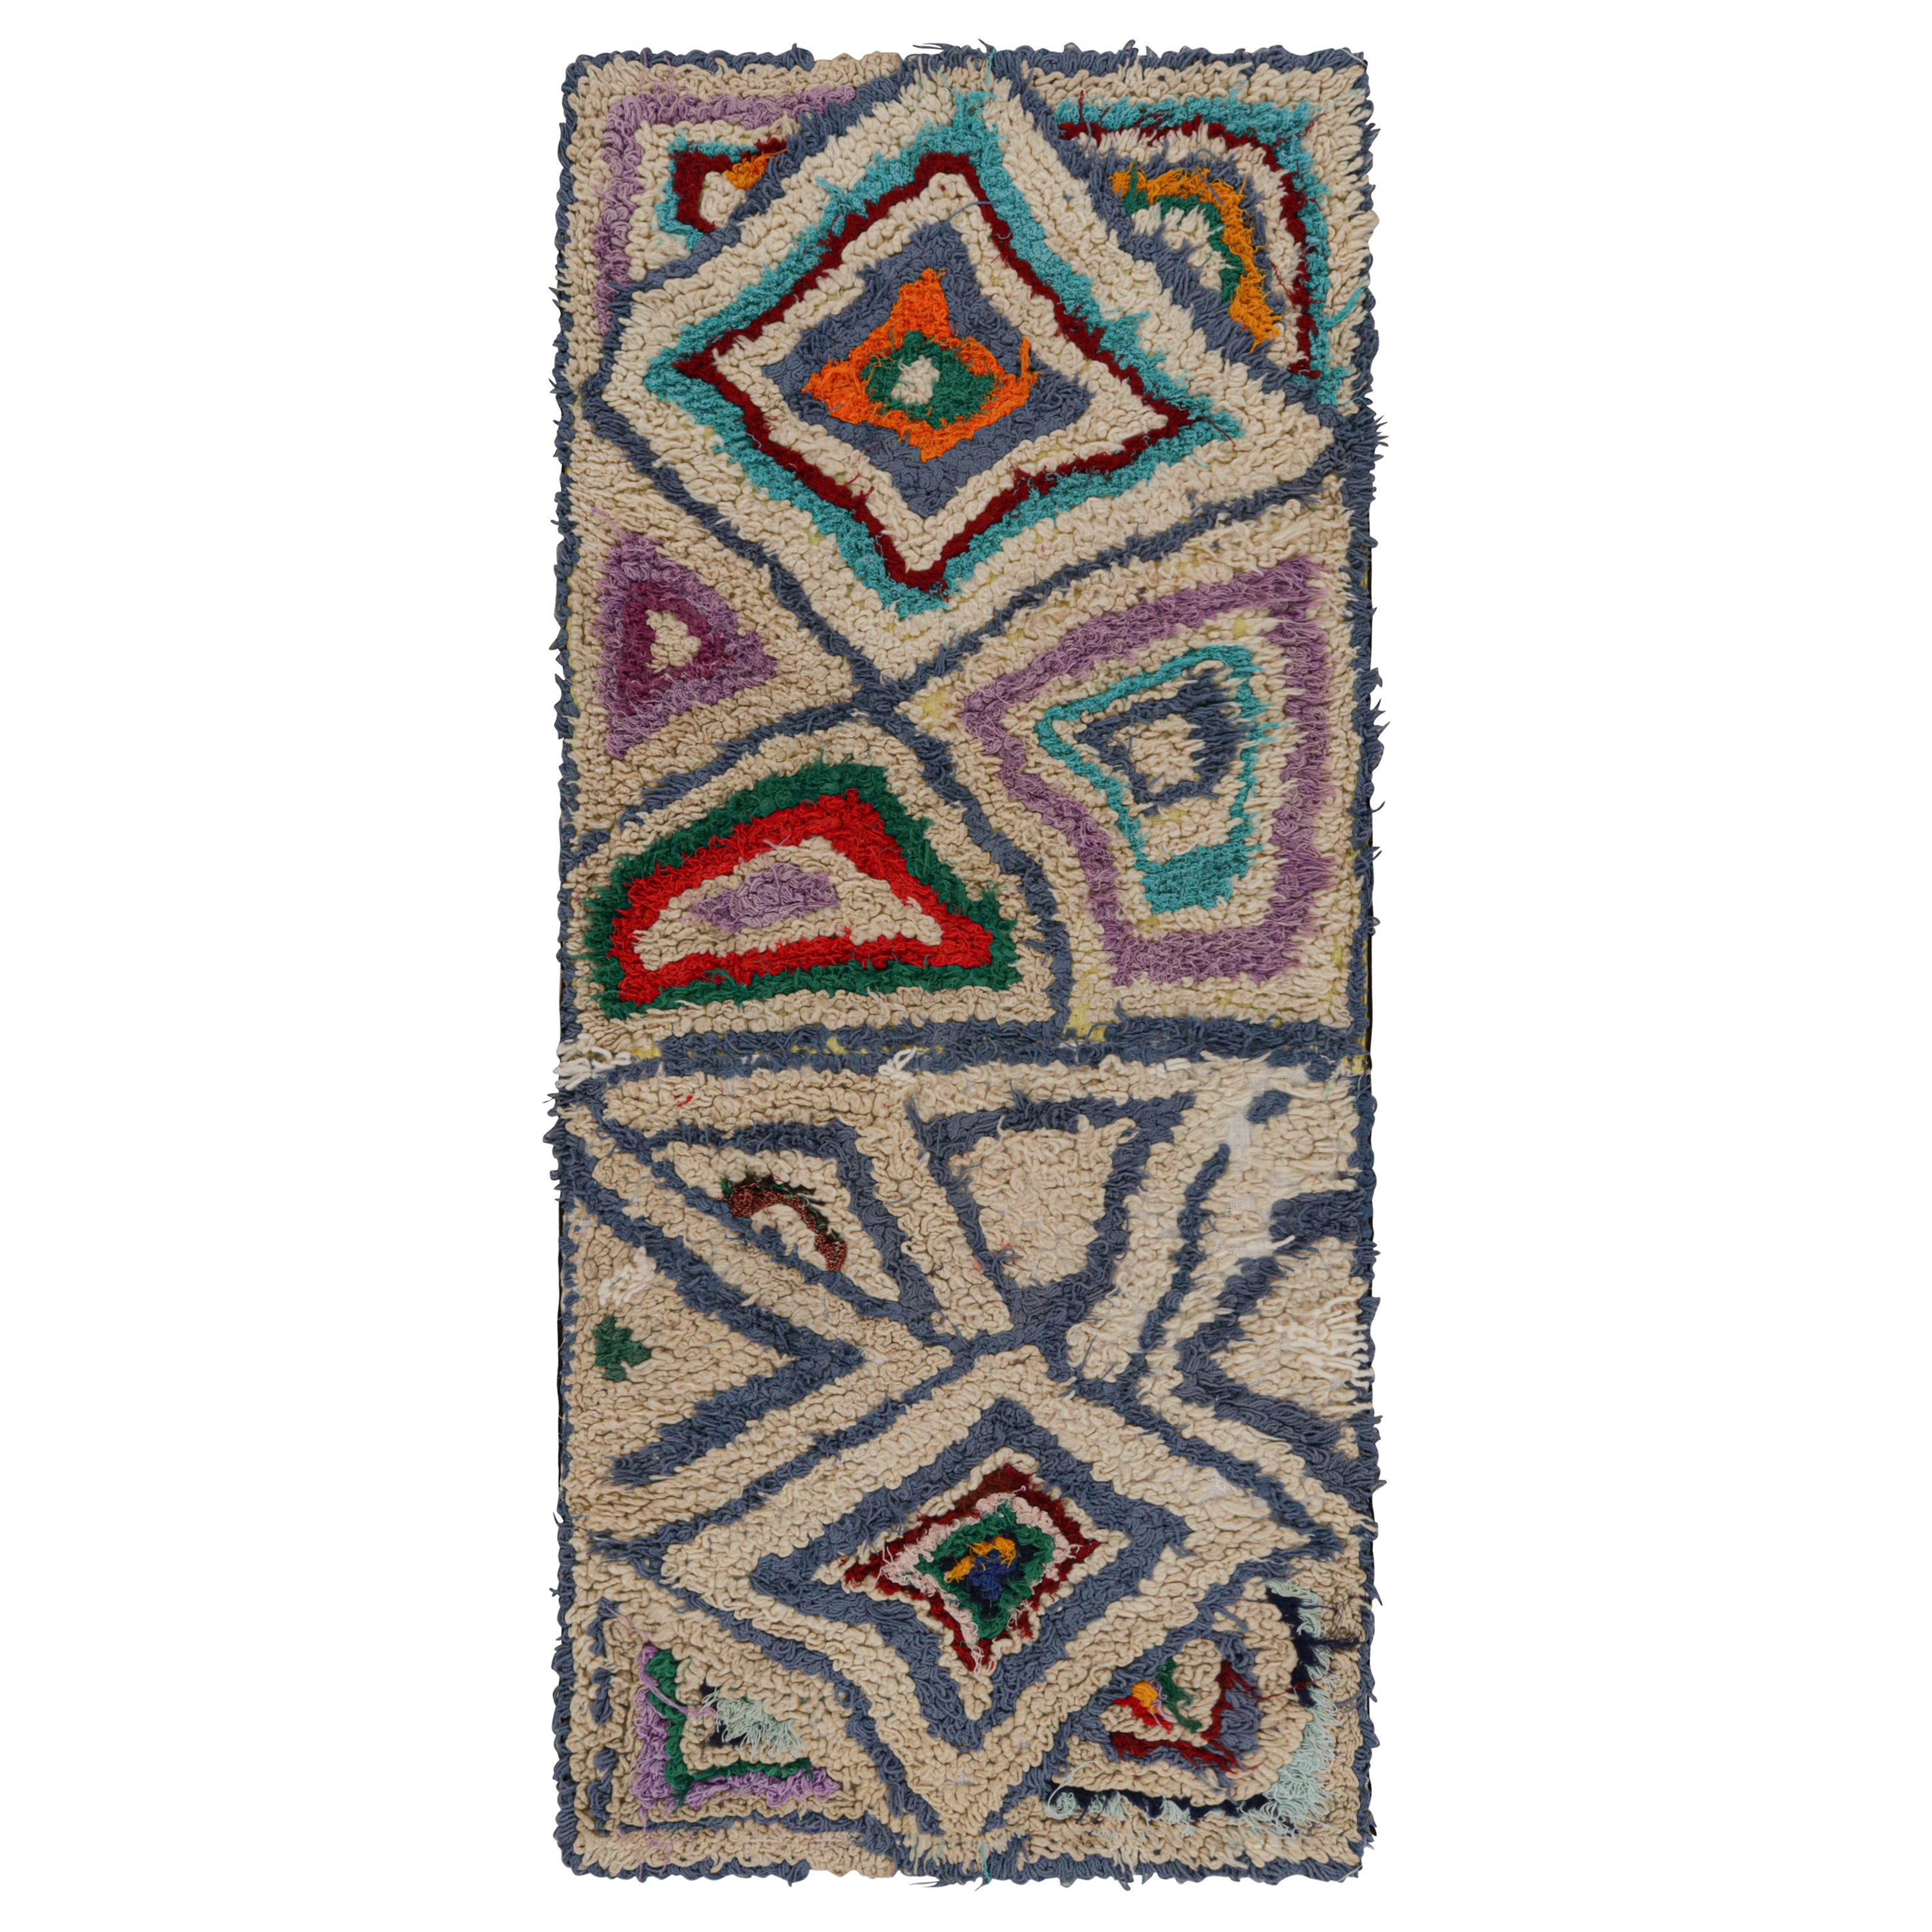 Vintage Moroccan Runner Rug with Geometric Patterns, from Rug & Kilim  For Sale